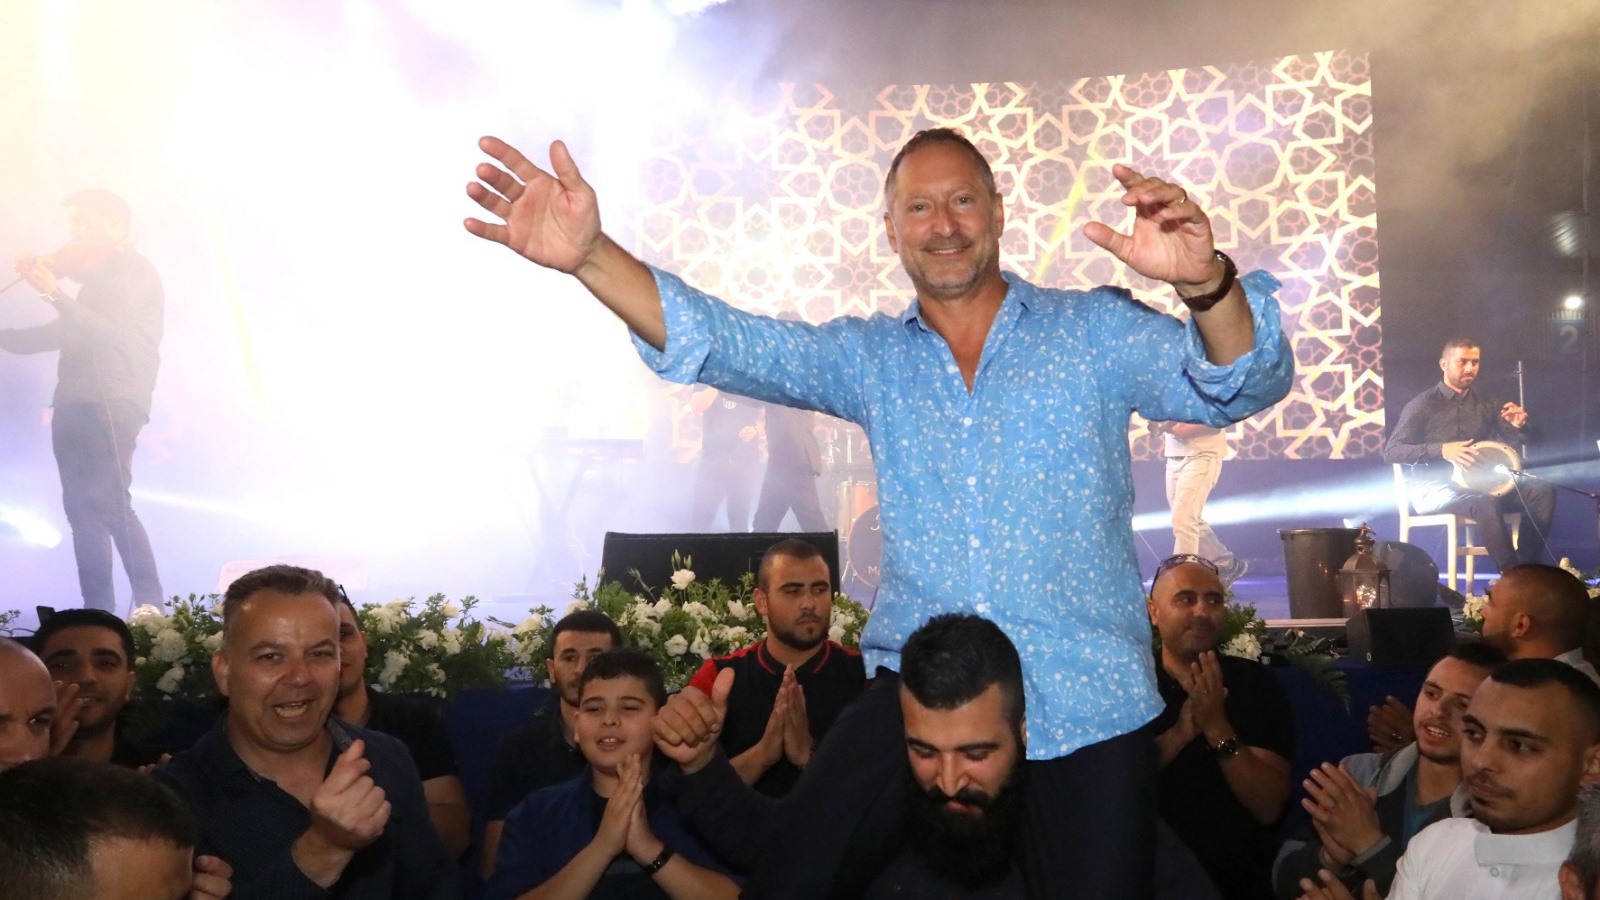 SodaStream CEO Daniel Birnbaum and employees celebrate at the company's Iftar dinner in the Negev on May 27, 2019. Photo by Sivan Faraj